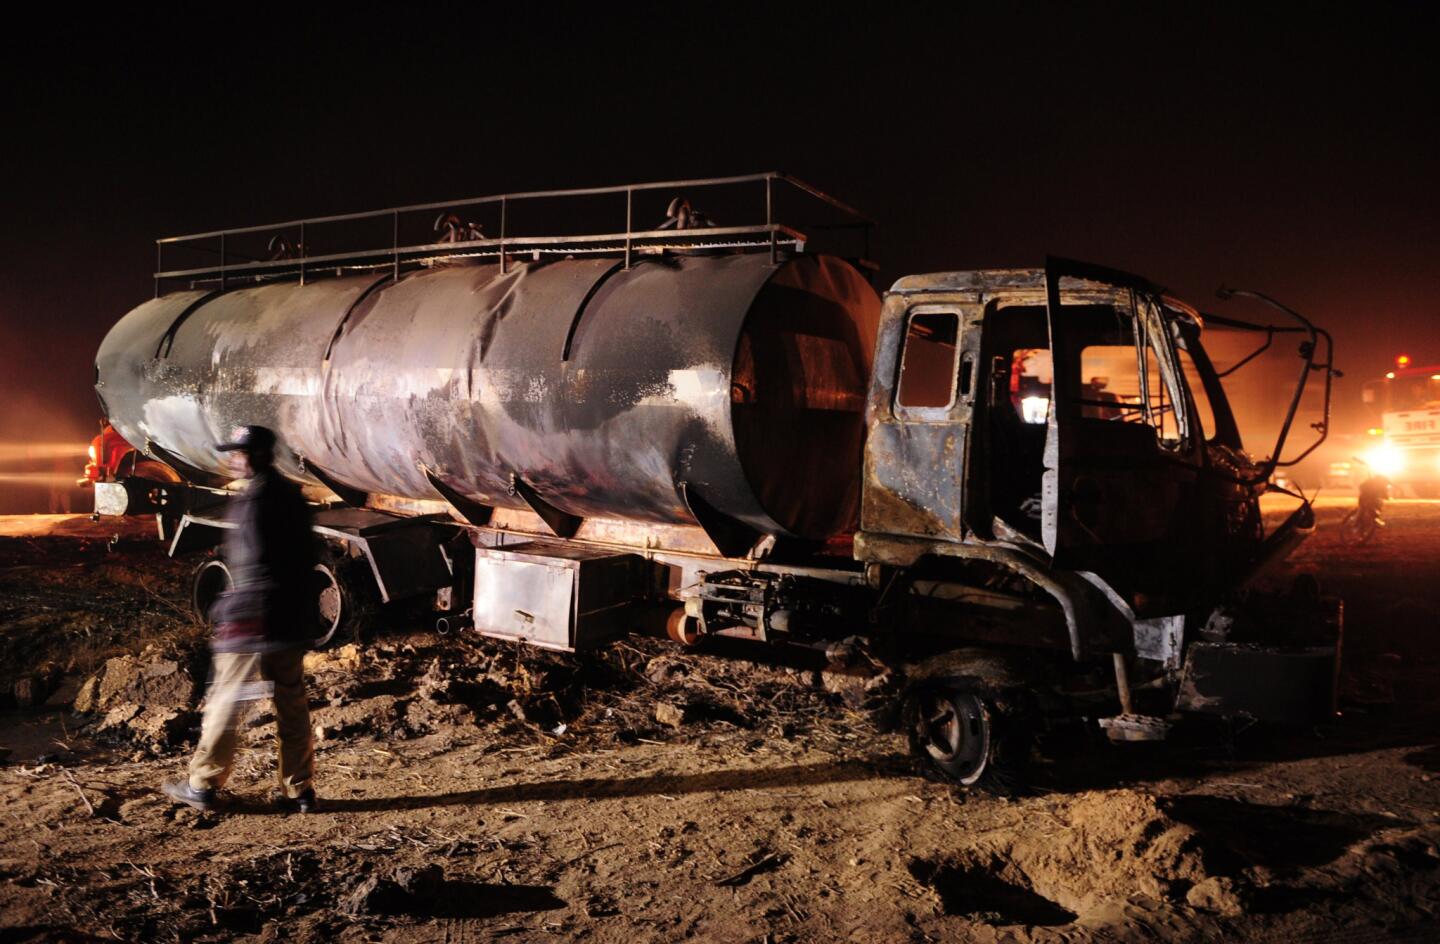 A Pakistani policeman examines a burned oil tanker that hit a passenger bus on a highway near Karachi.